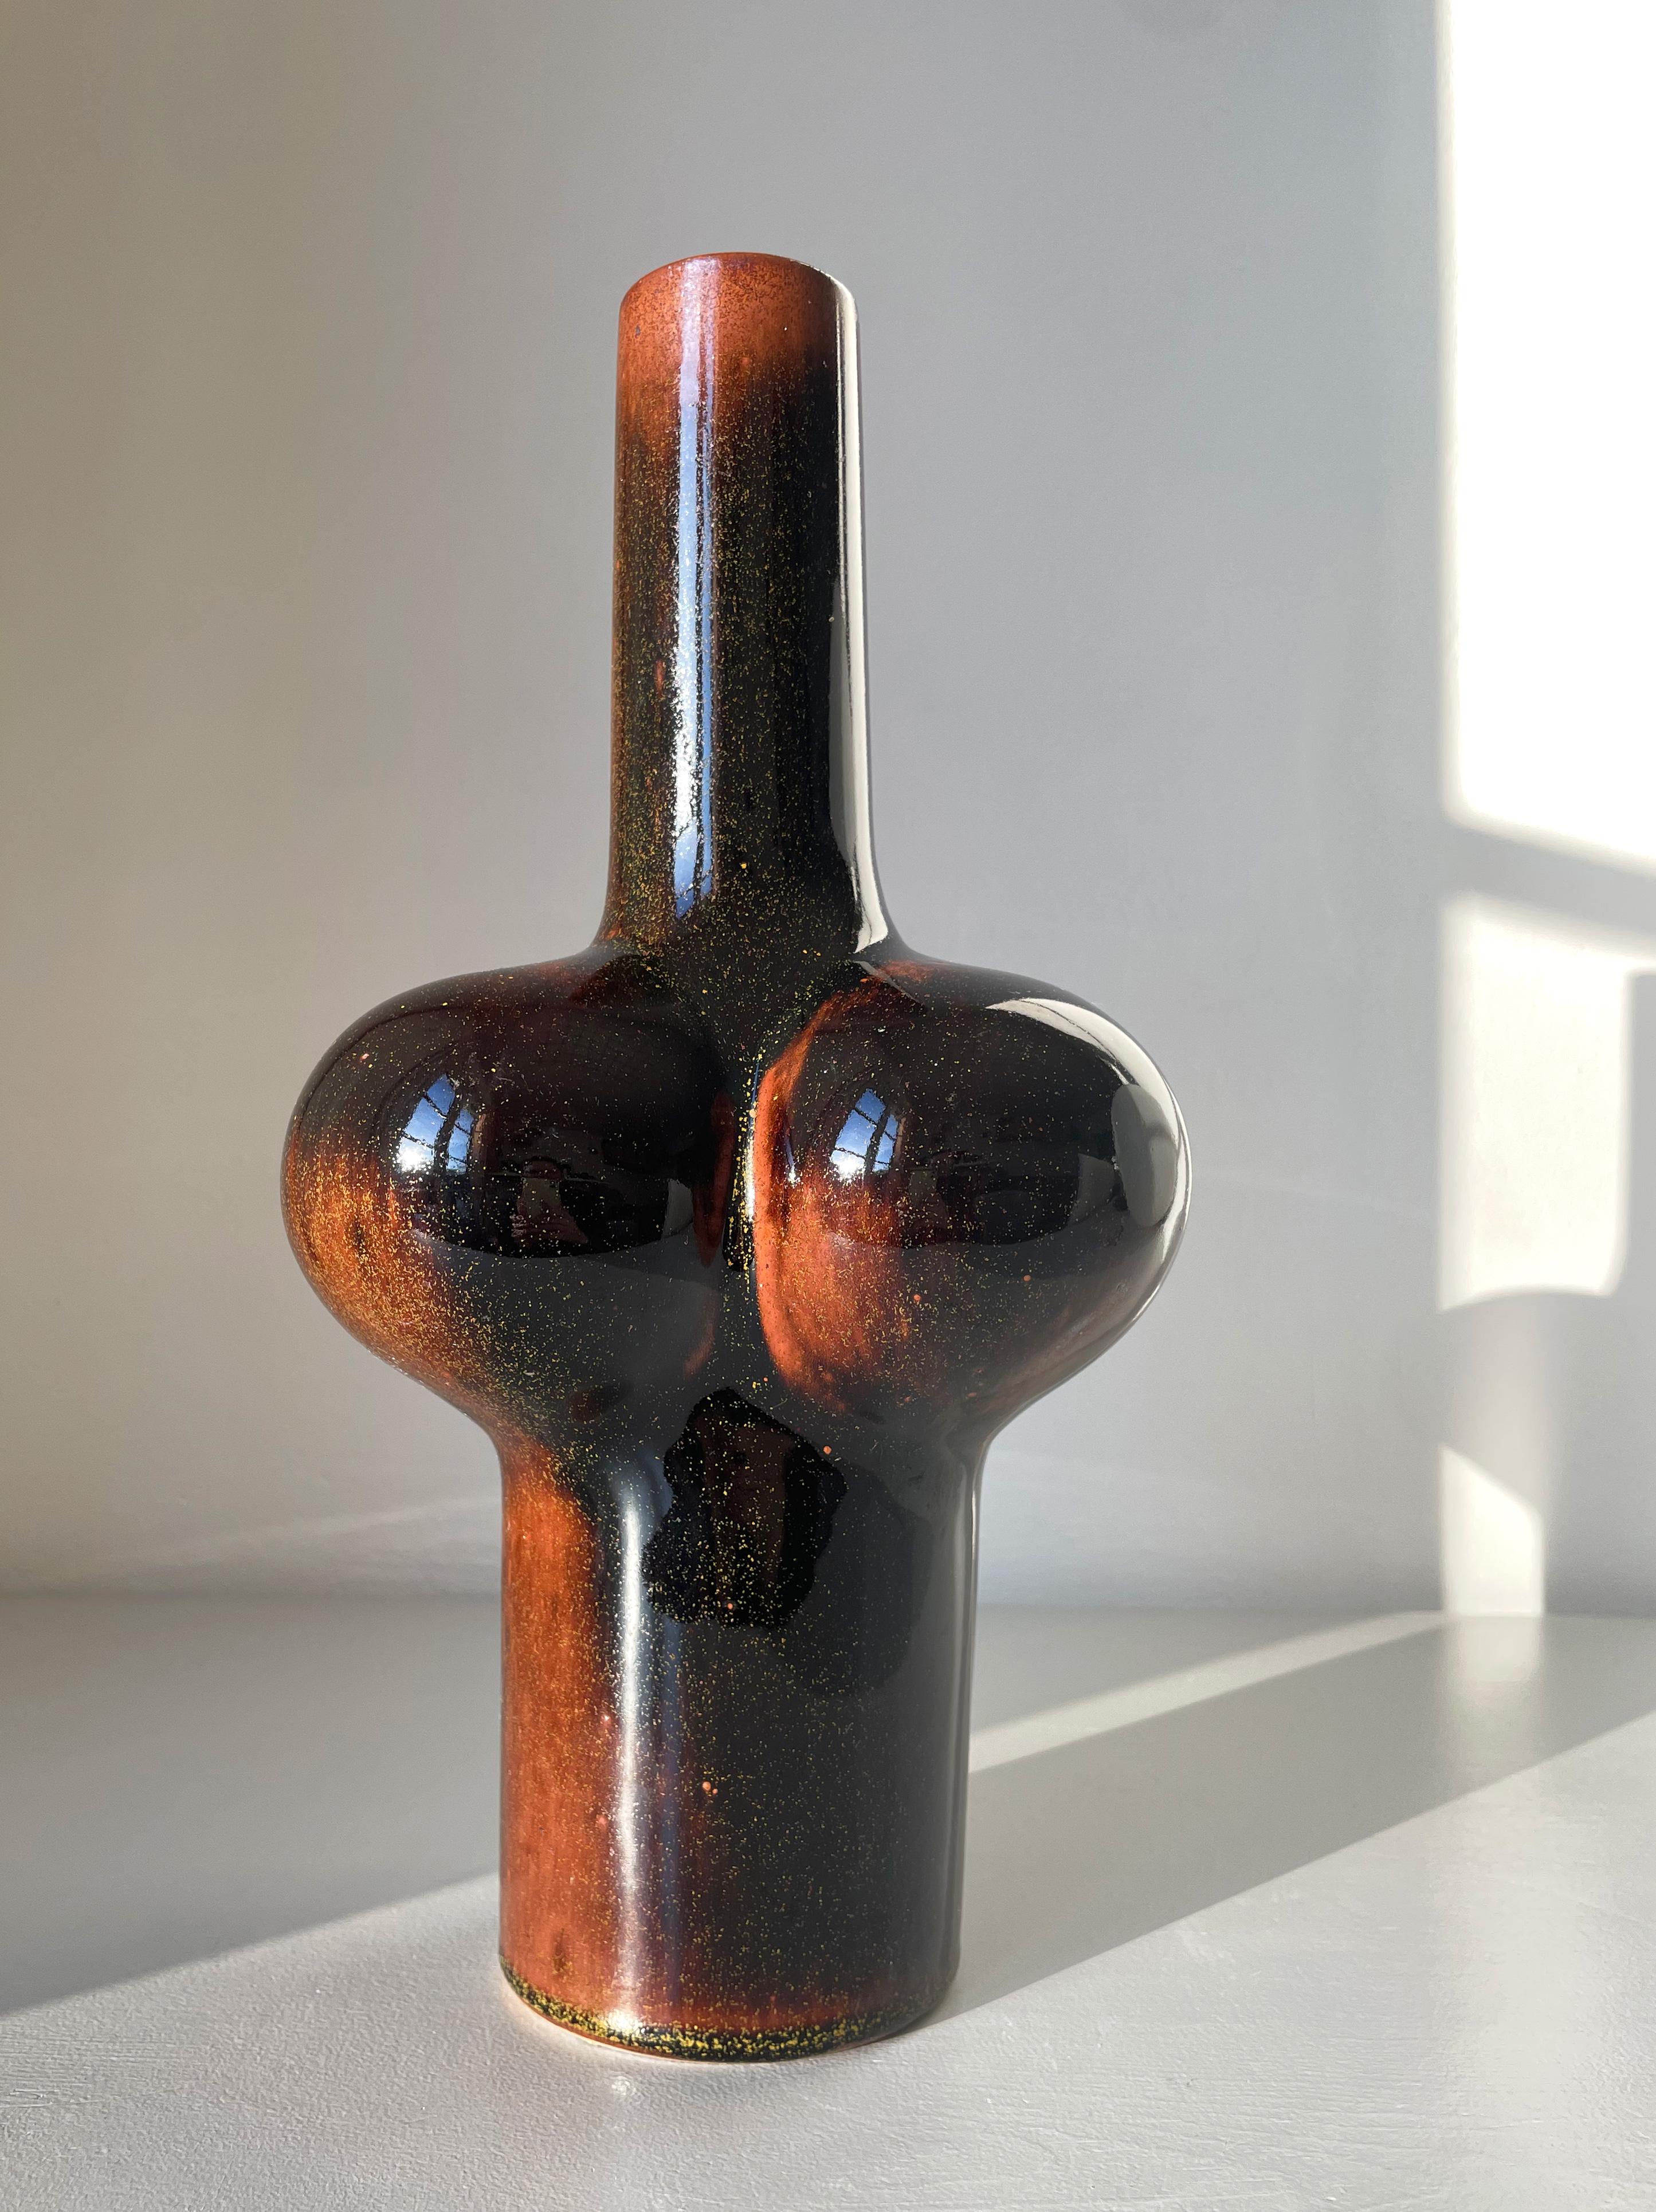 Danish modernist golden speckled shiny caramel, umber and dark chocolate brown fully glazed stoneware vase. Circular base with long slender neck and three soft spheres around the center. Designed in the 1960s by Tue Poulsen for Knabstrup. Stamped